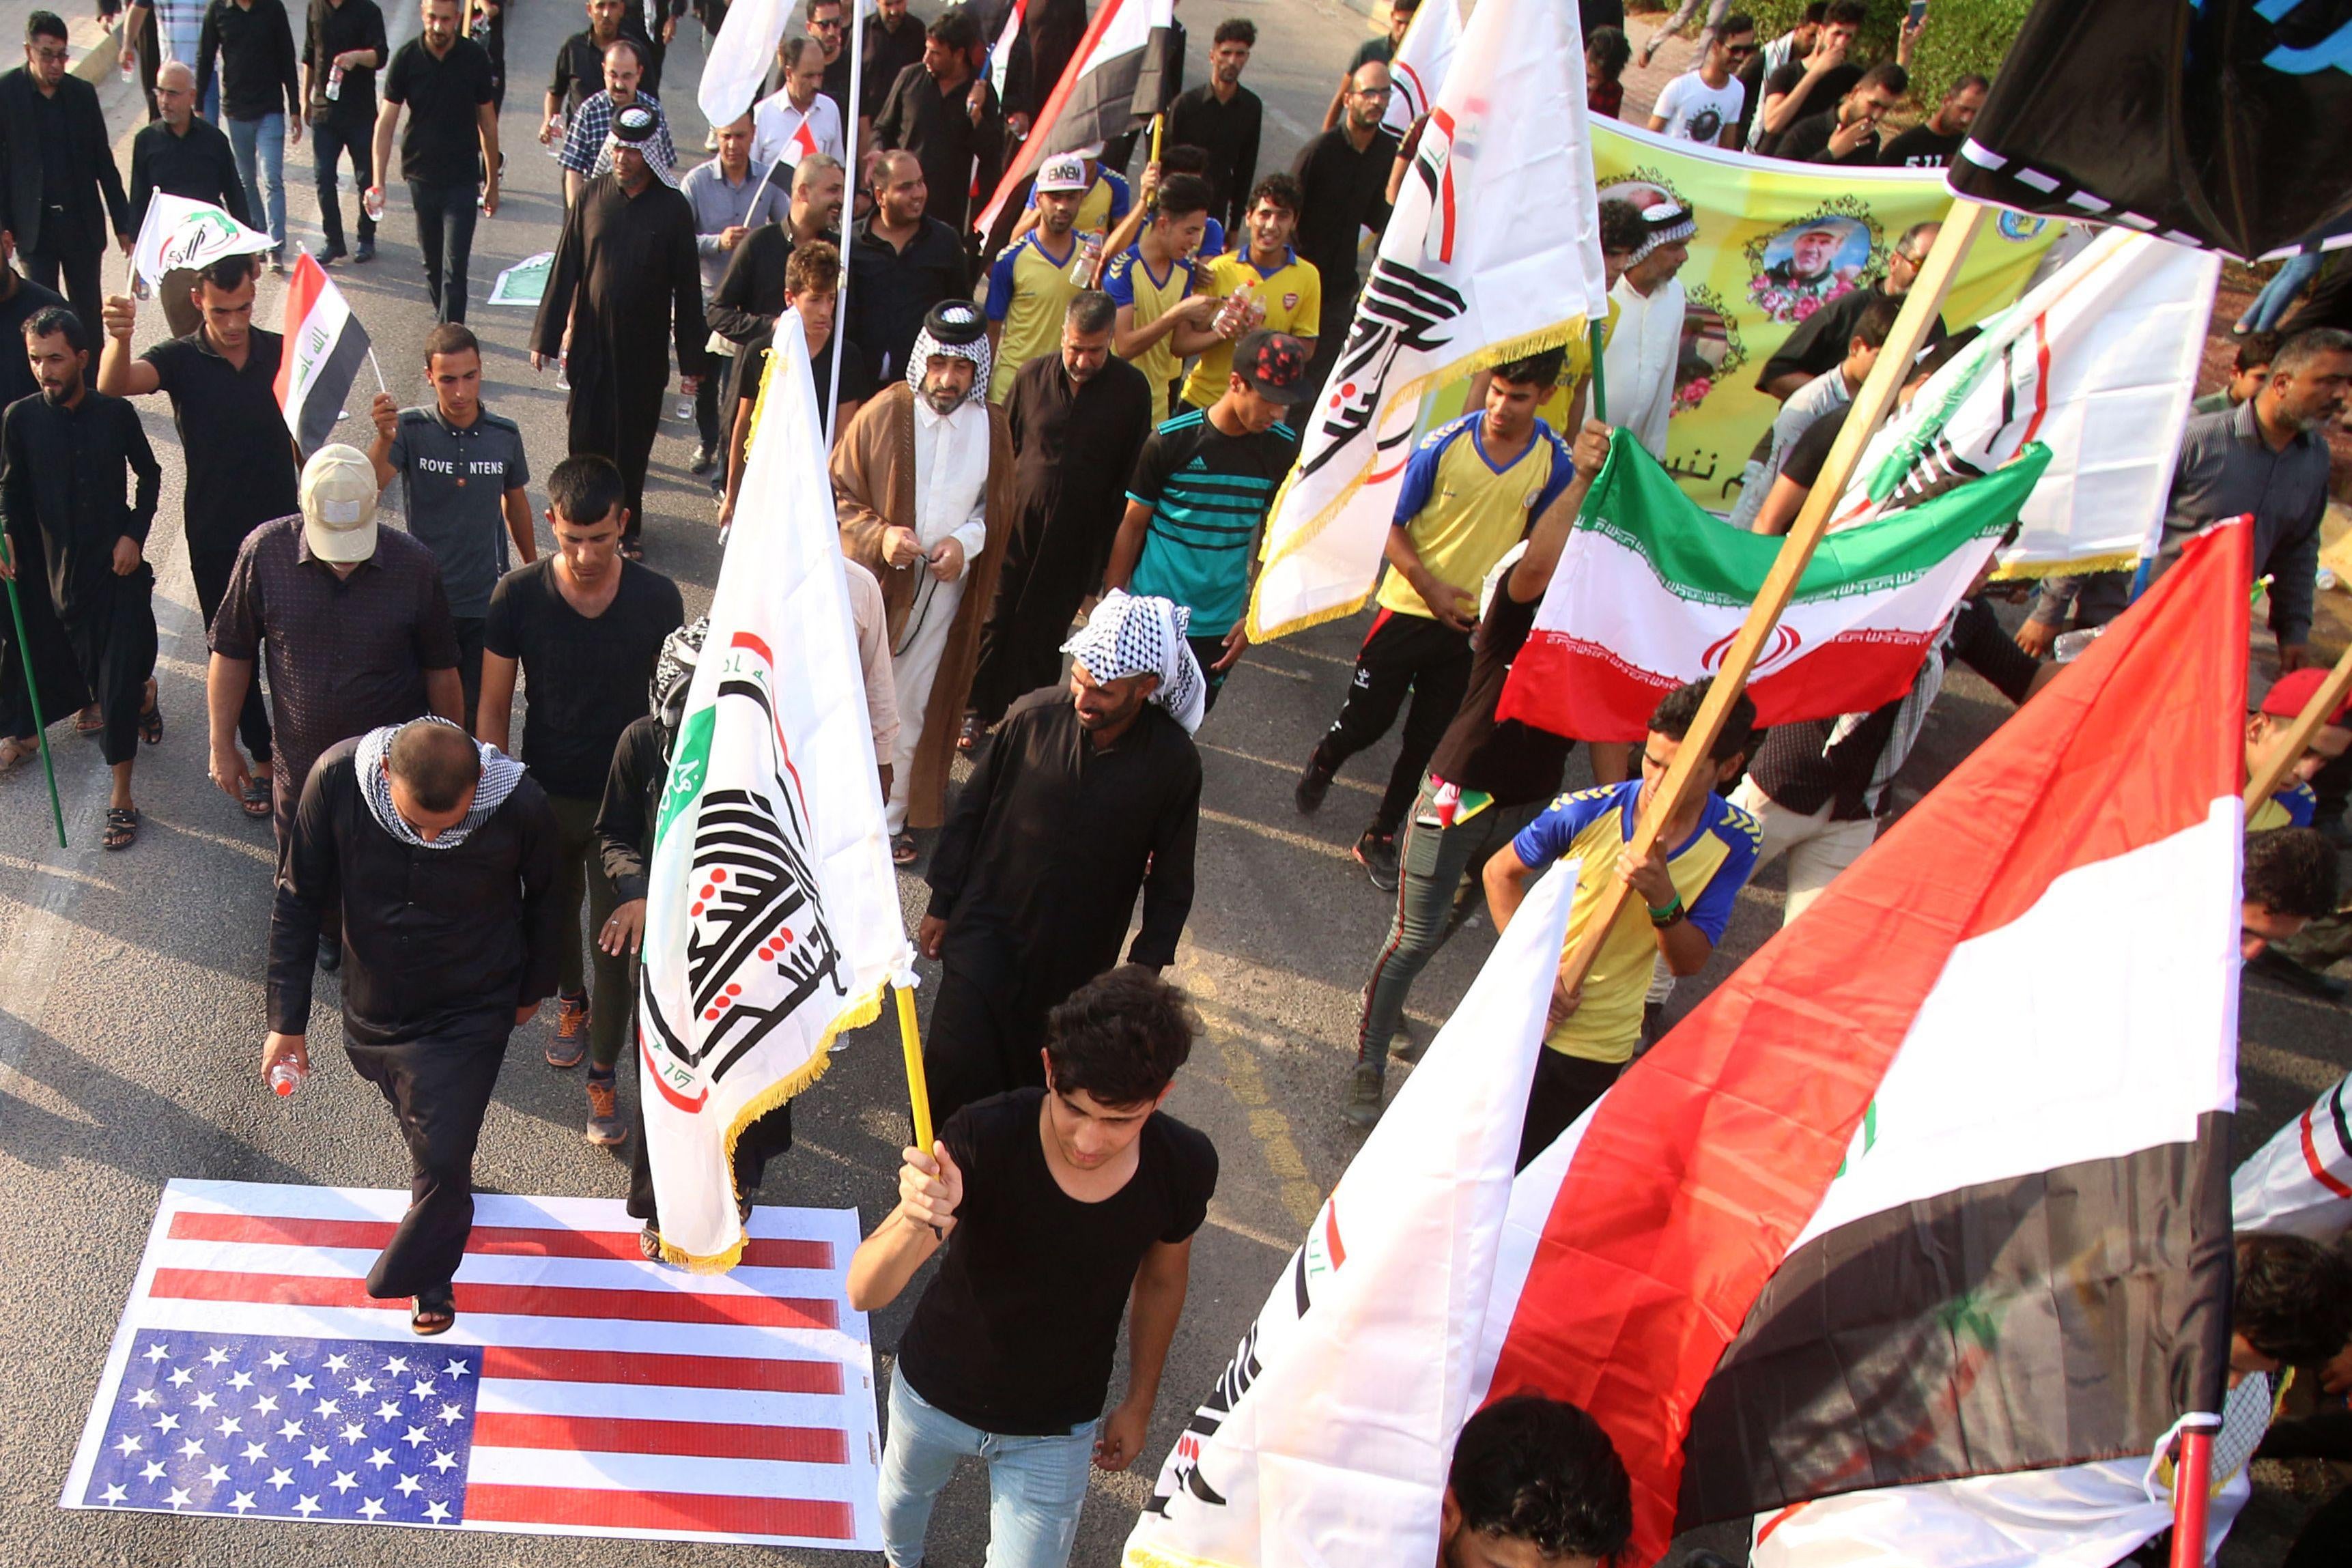 Demonstrators waving Iranian and pro-Iranian party flags step on a U.S. flag as they march